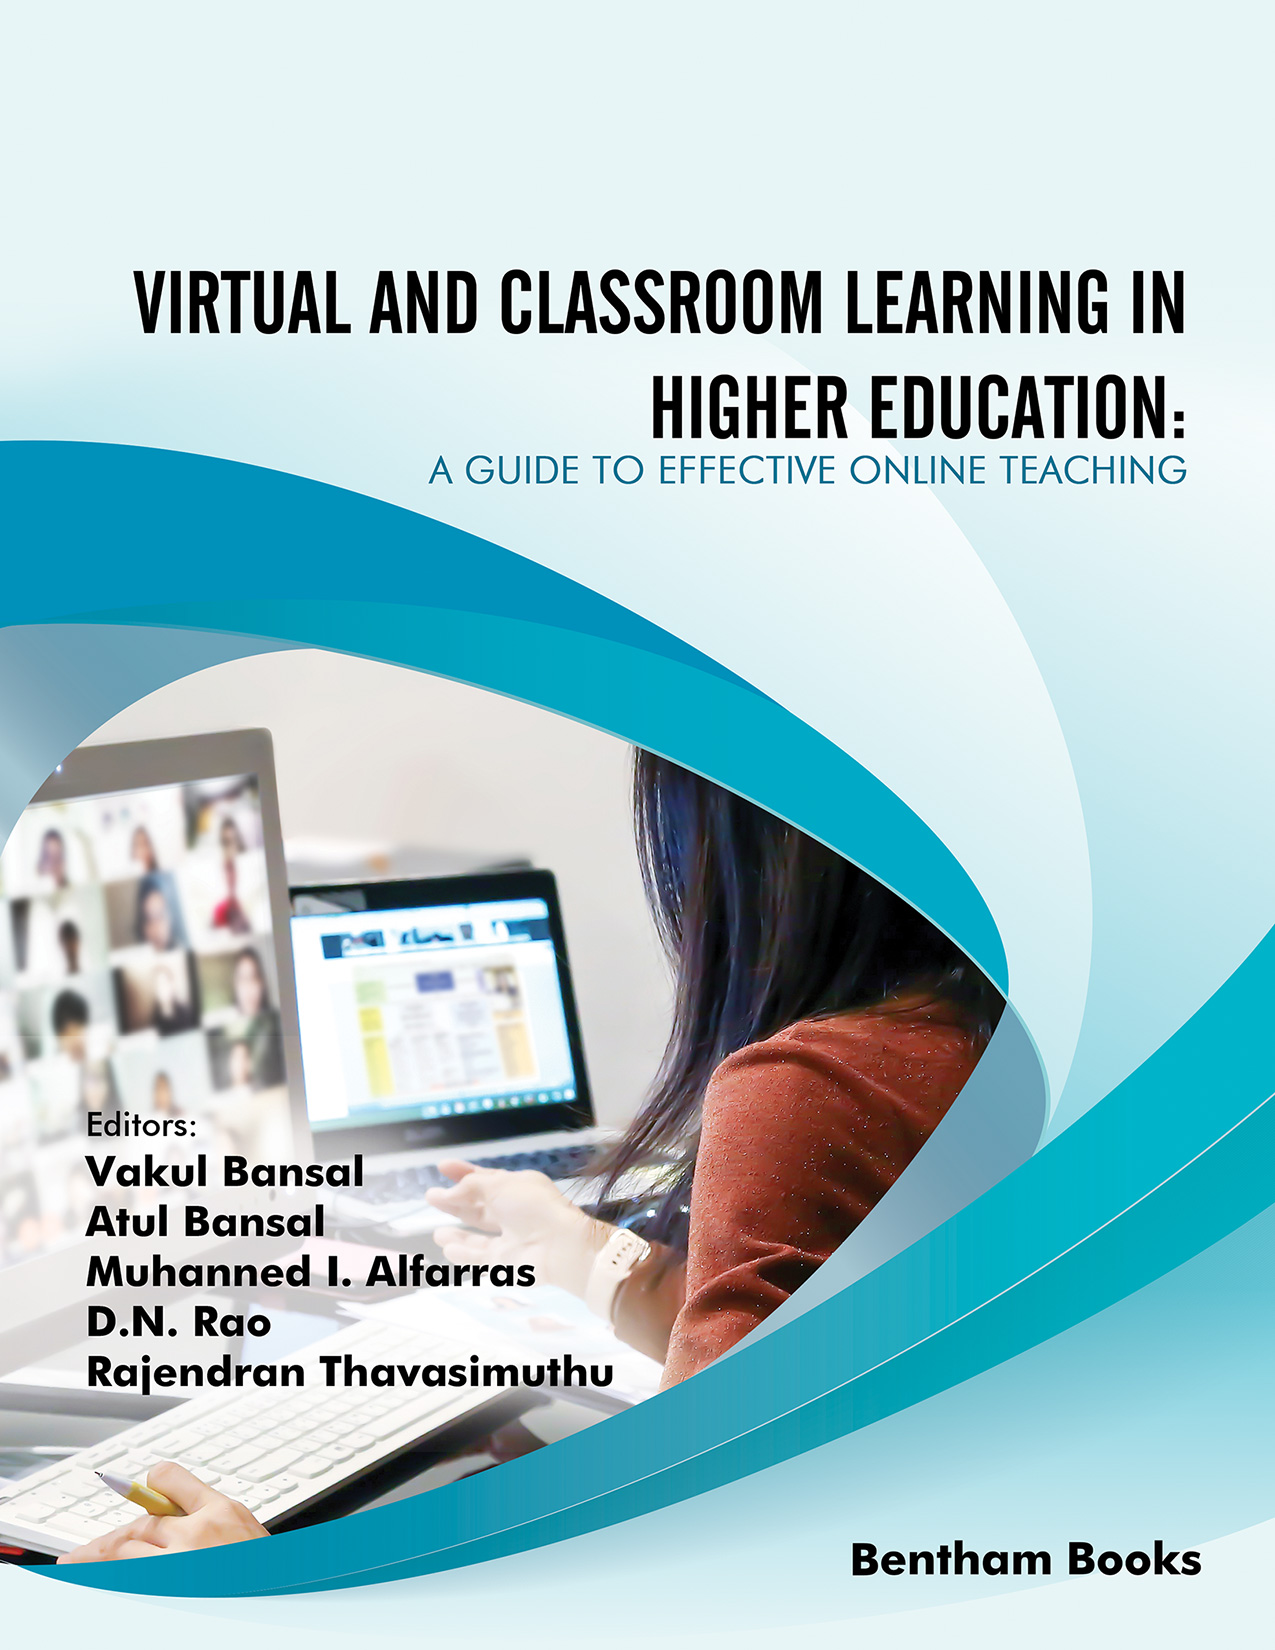 Virtual and Classroom Learning in Higher Education: A Guide to Effective Online Teaching